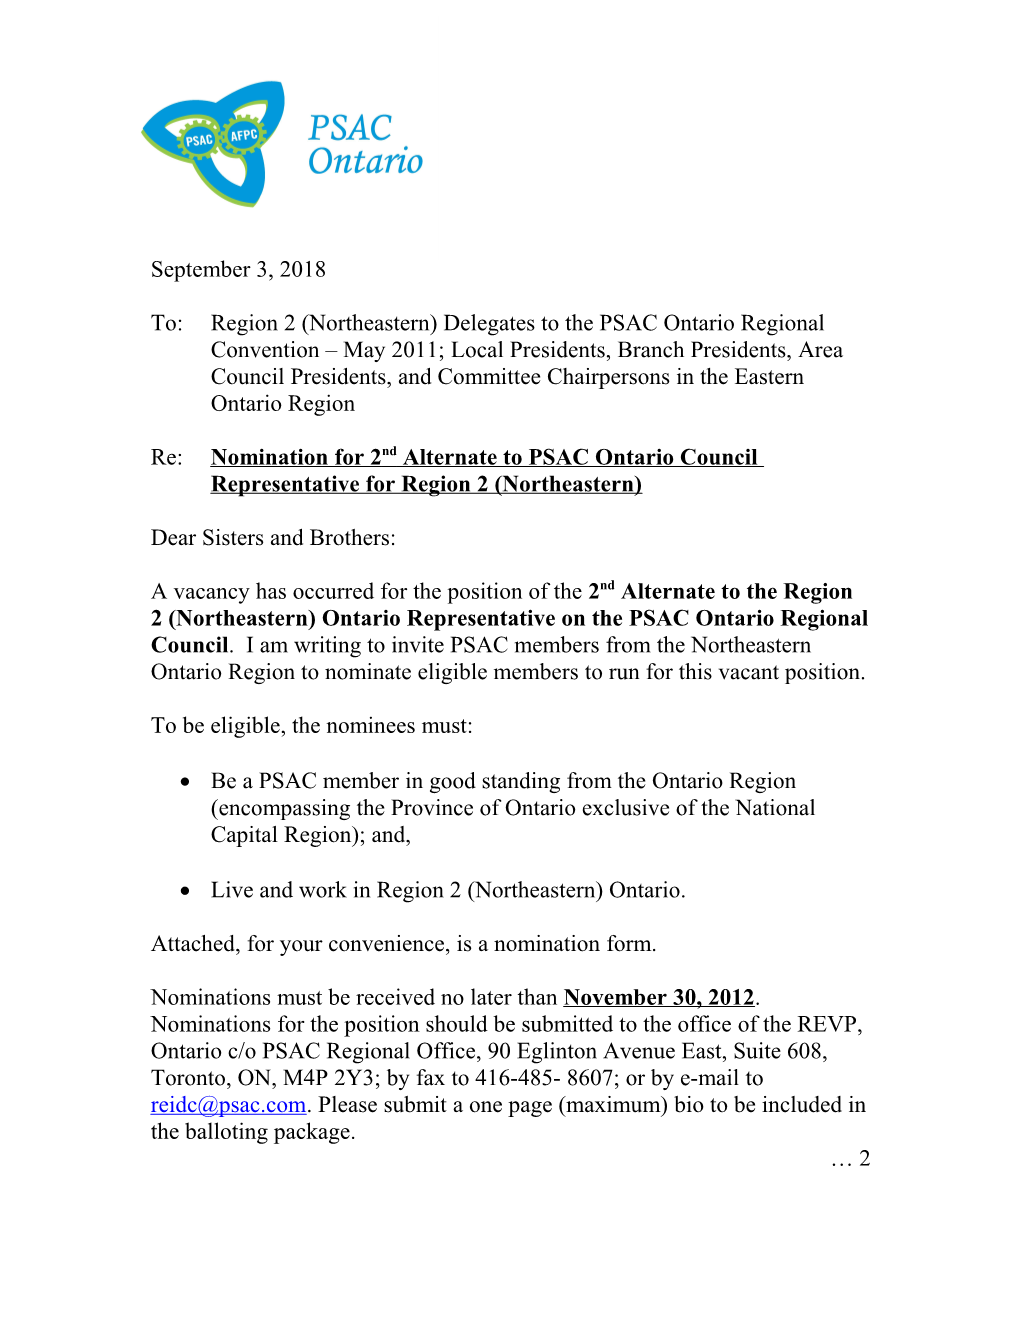 Re: Nomination for 2Ndalternate to PSAC Ontario Council Representative for Region 2